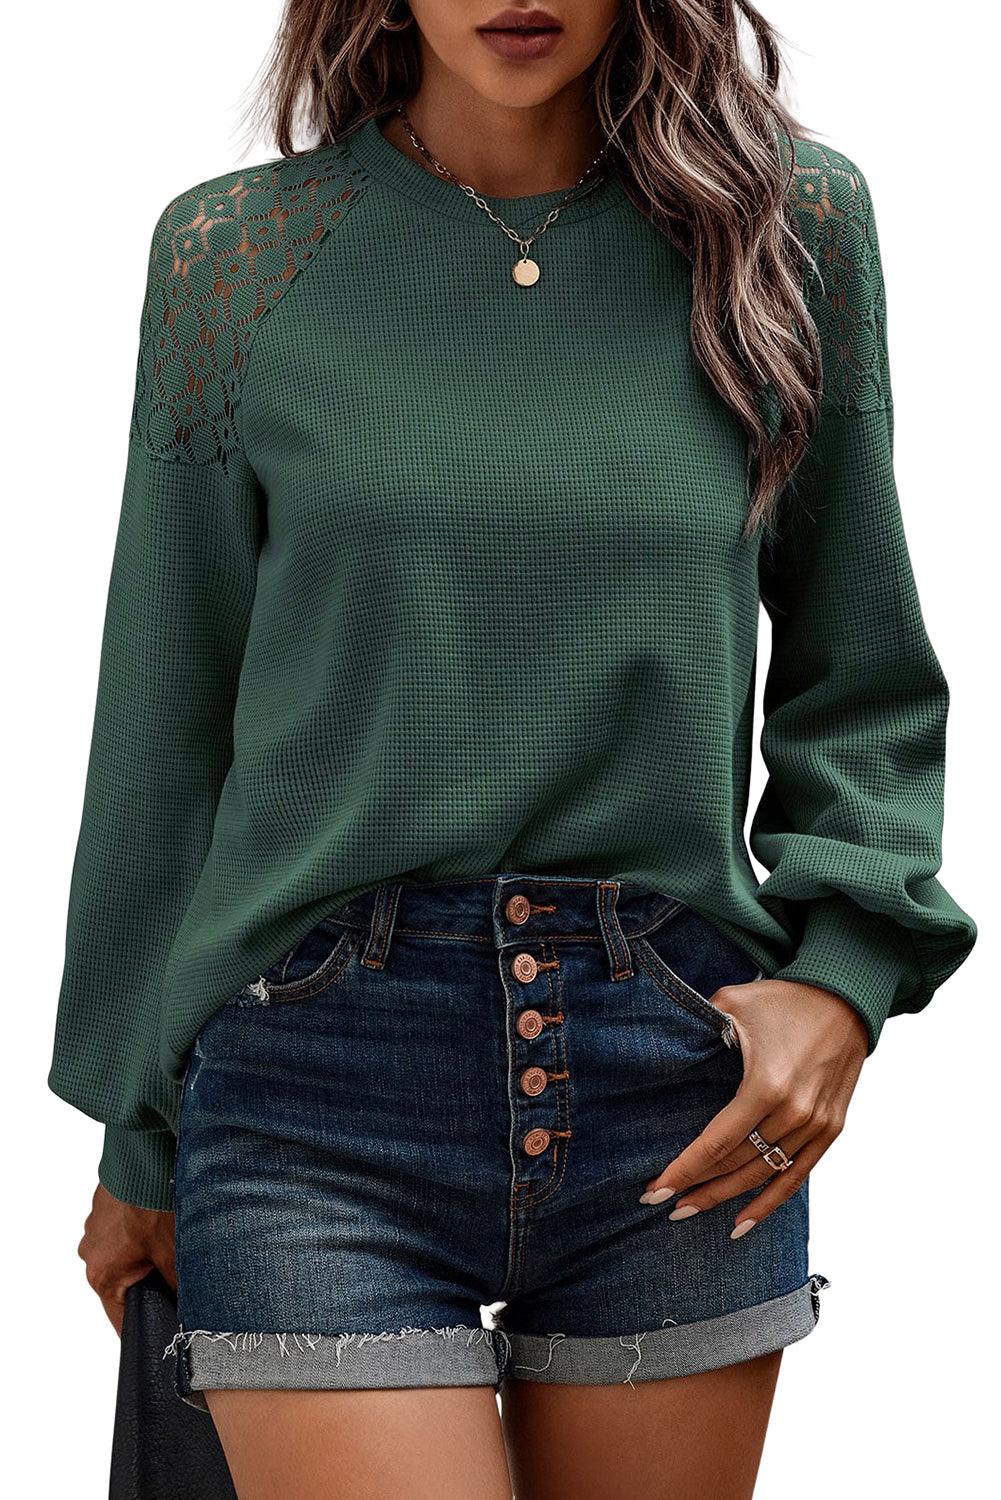 Green Lace Long Sleeve Textured Pullover - L & M Kee, LLC